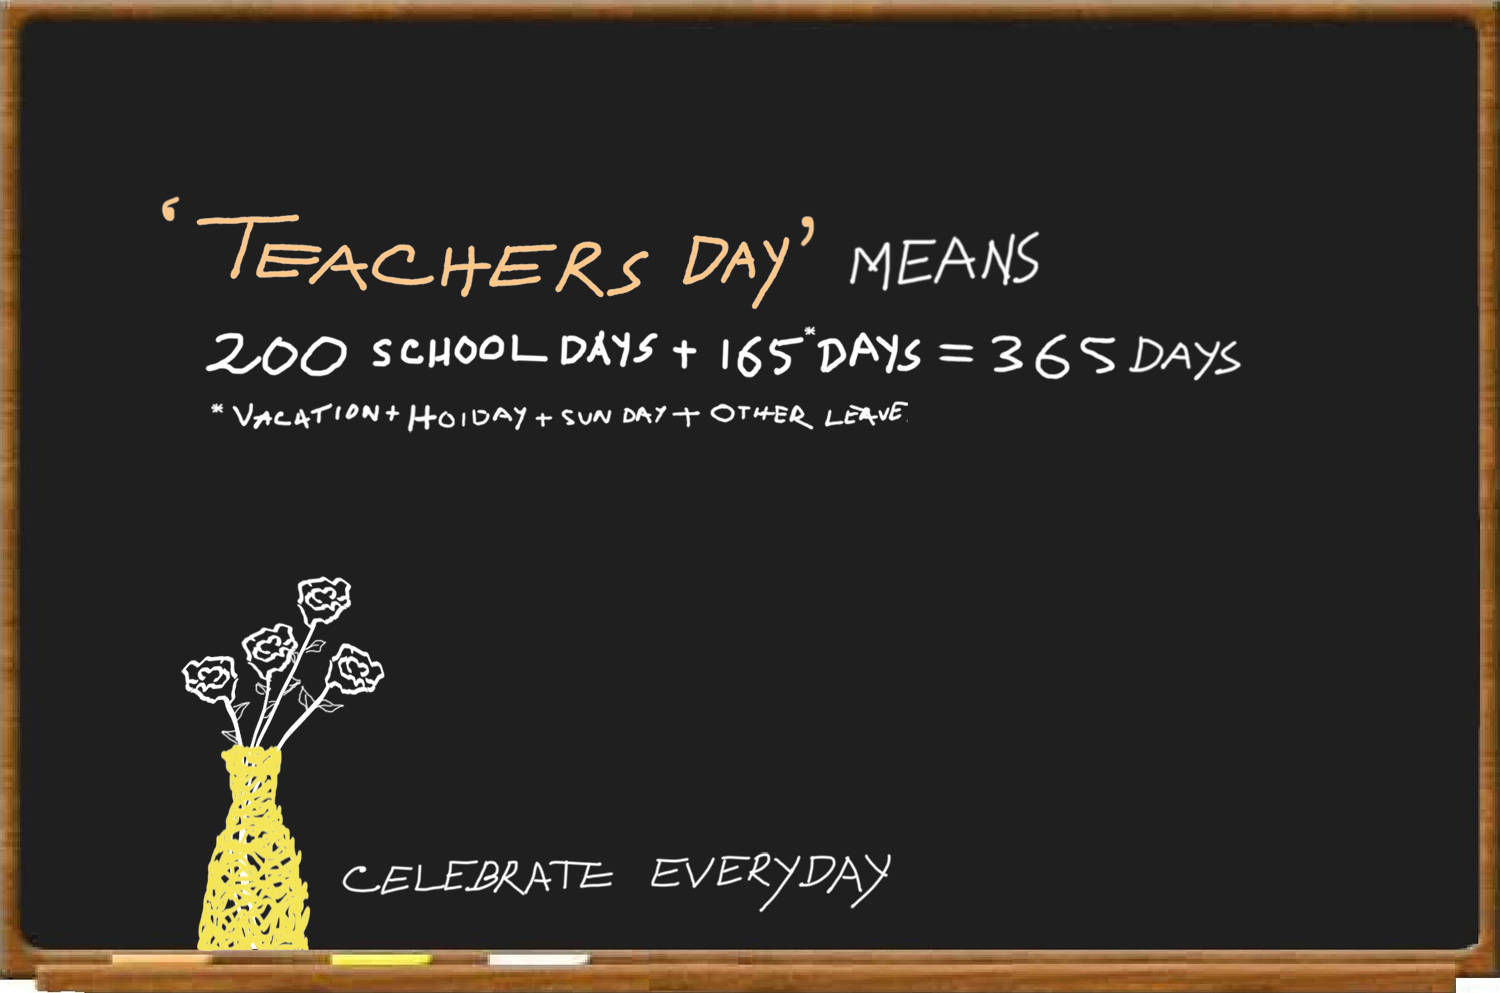 Happy Teachers' Day Meaning